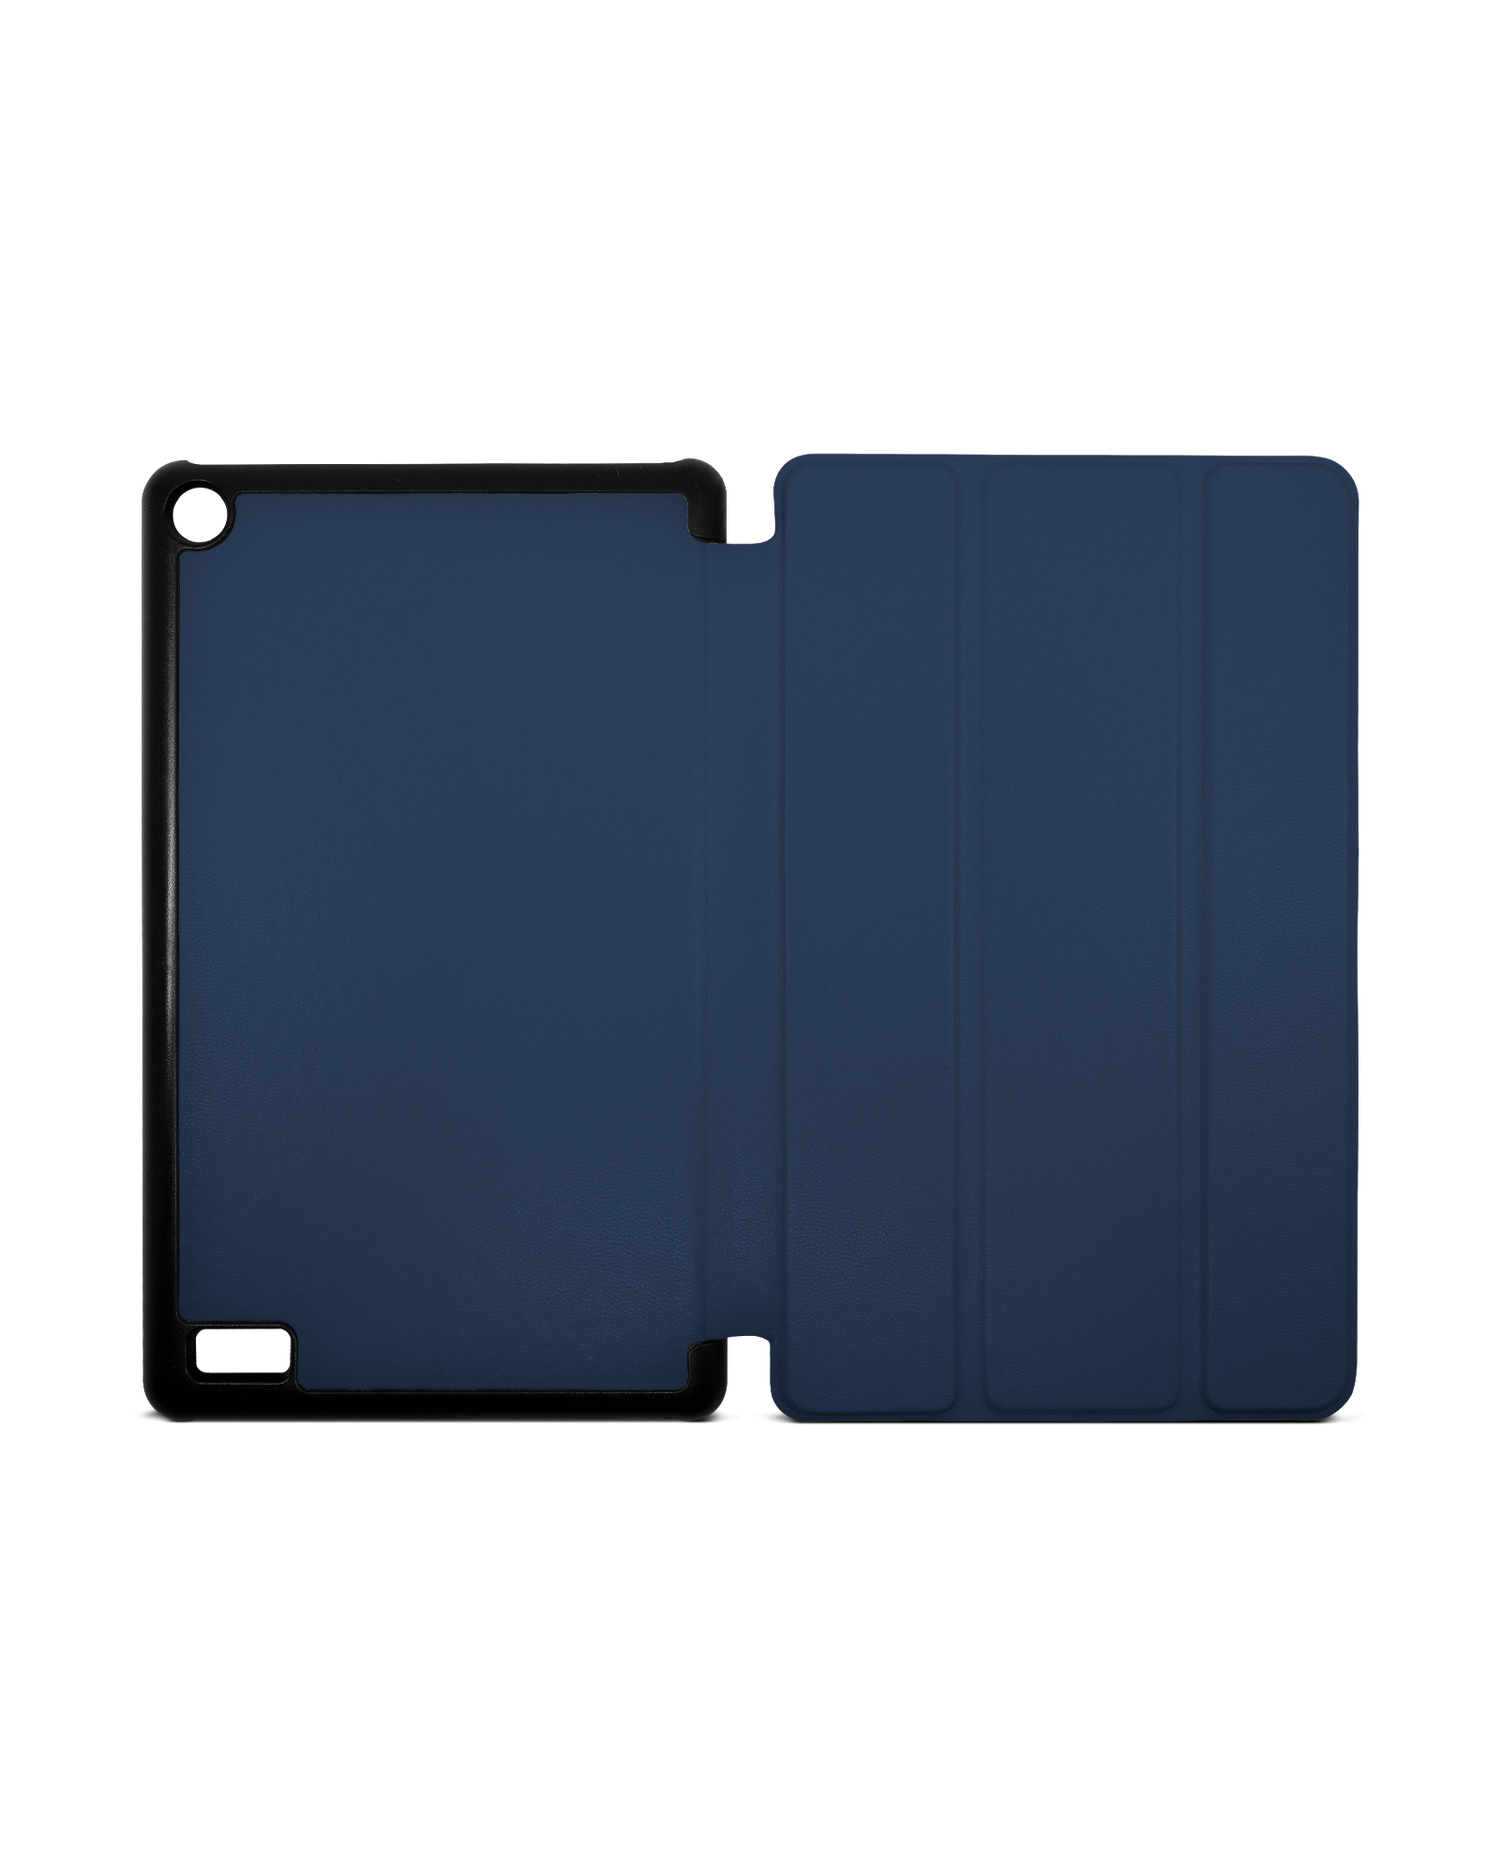 NAVY Tablet Smart Case for Amazon Fire 7: Opened